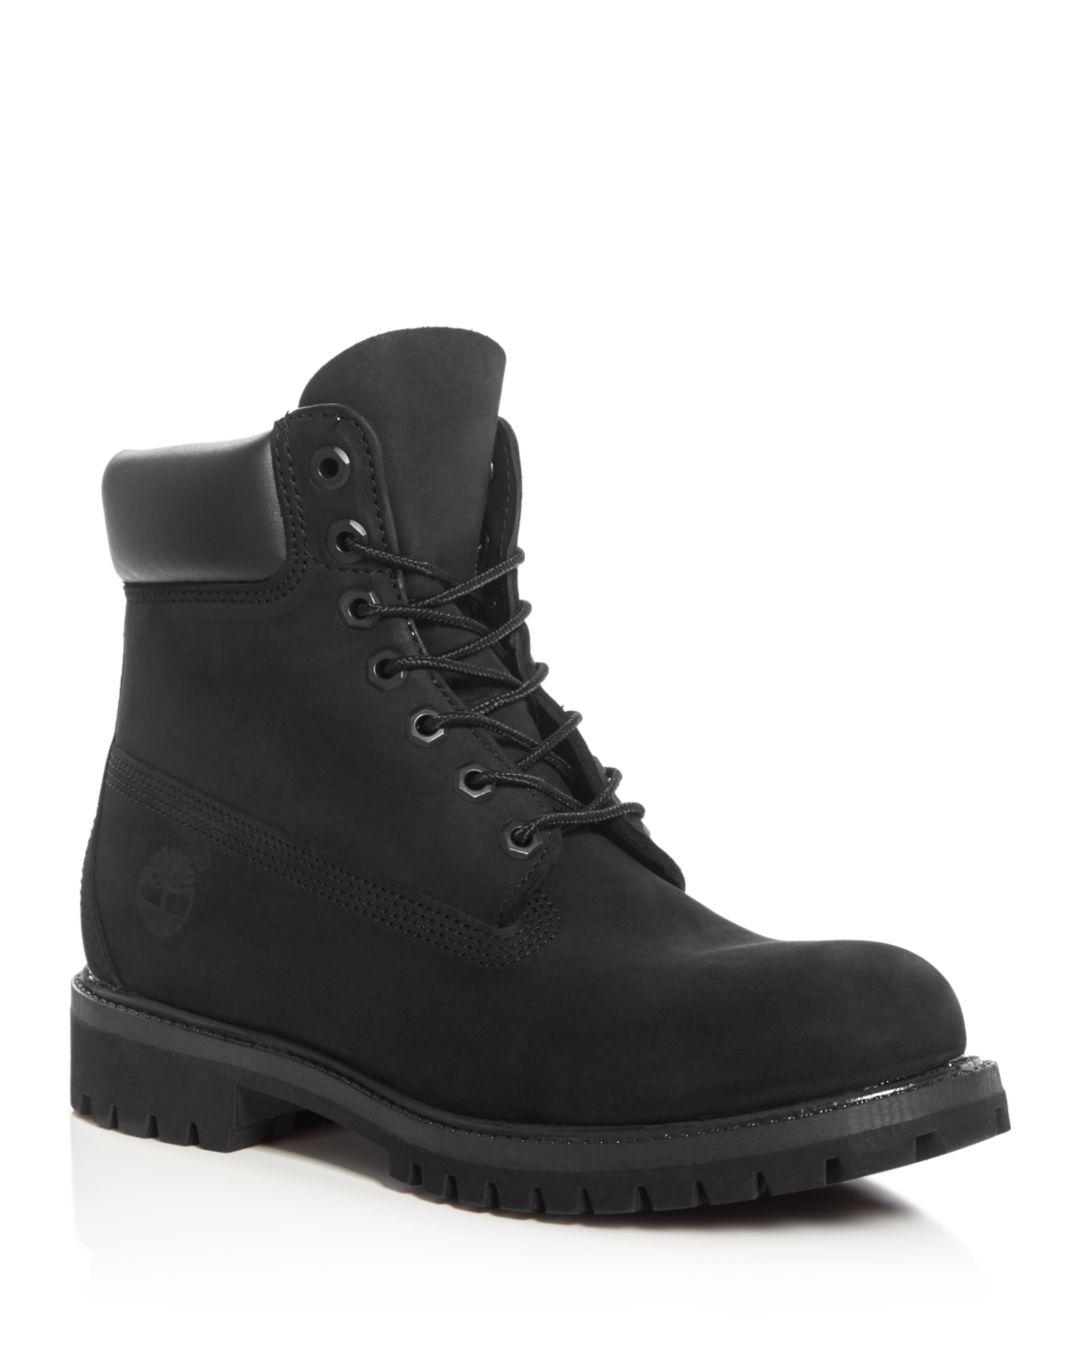 Timberland Leather Men's Premium Waterproof Boots in Black for Men - Lyst